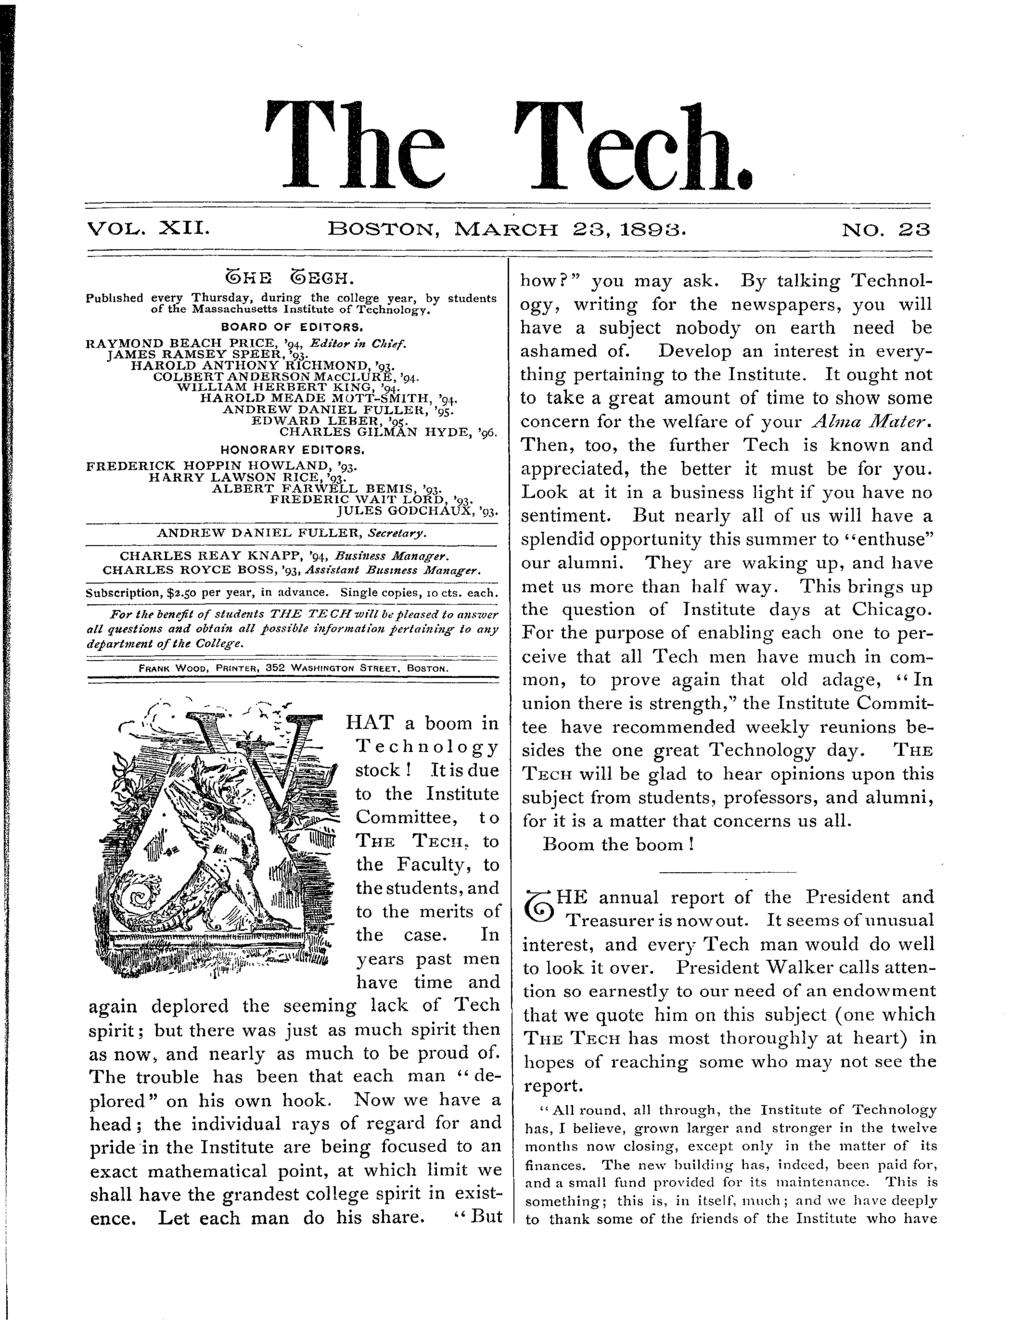 he Tech. VOL. X. BOSTON MARCH- 23 1893. NO. 23 HE EGH. Publshed every Thursday durng the college year by students of the Massachusetts nsttute of Technology. BOARD OF EDTORS.